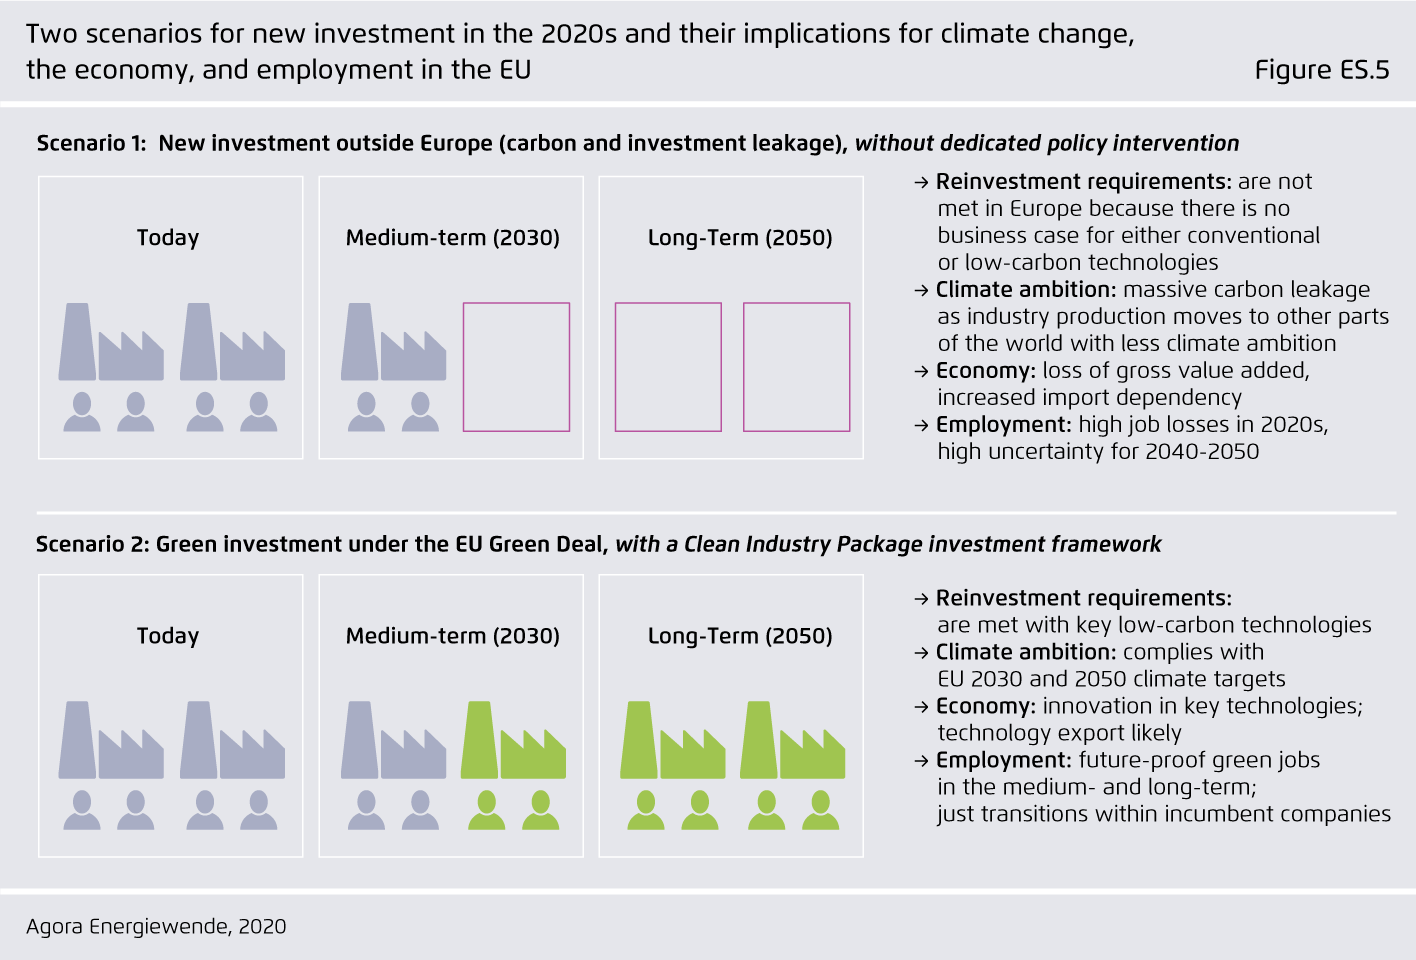 Preview for Two scenarios for new investment in the 2020s and their implications for climate change, the economy, and employment in the EU